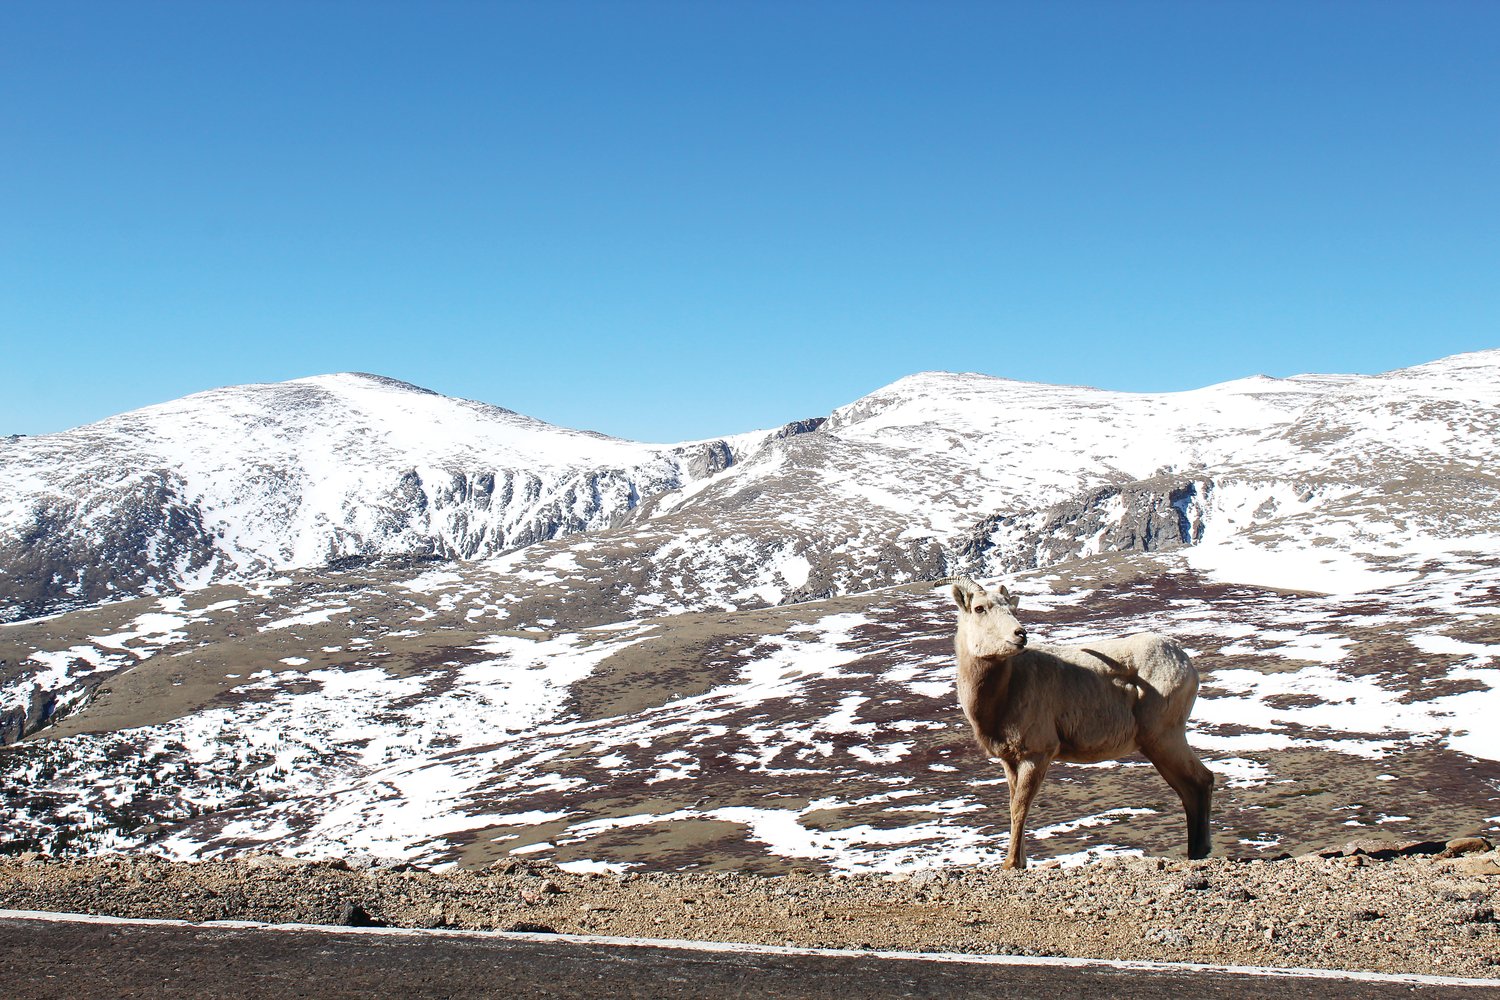 An adolescent bighorn sheep stands along the Mount Evans Scenic Byway.